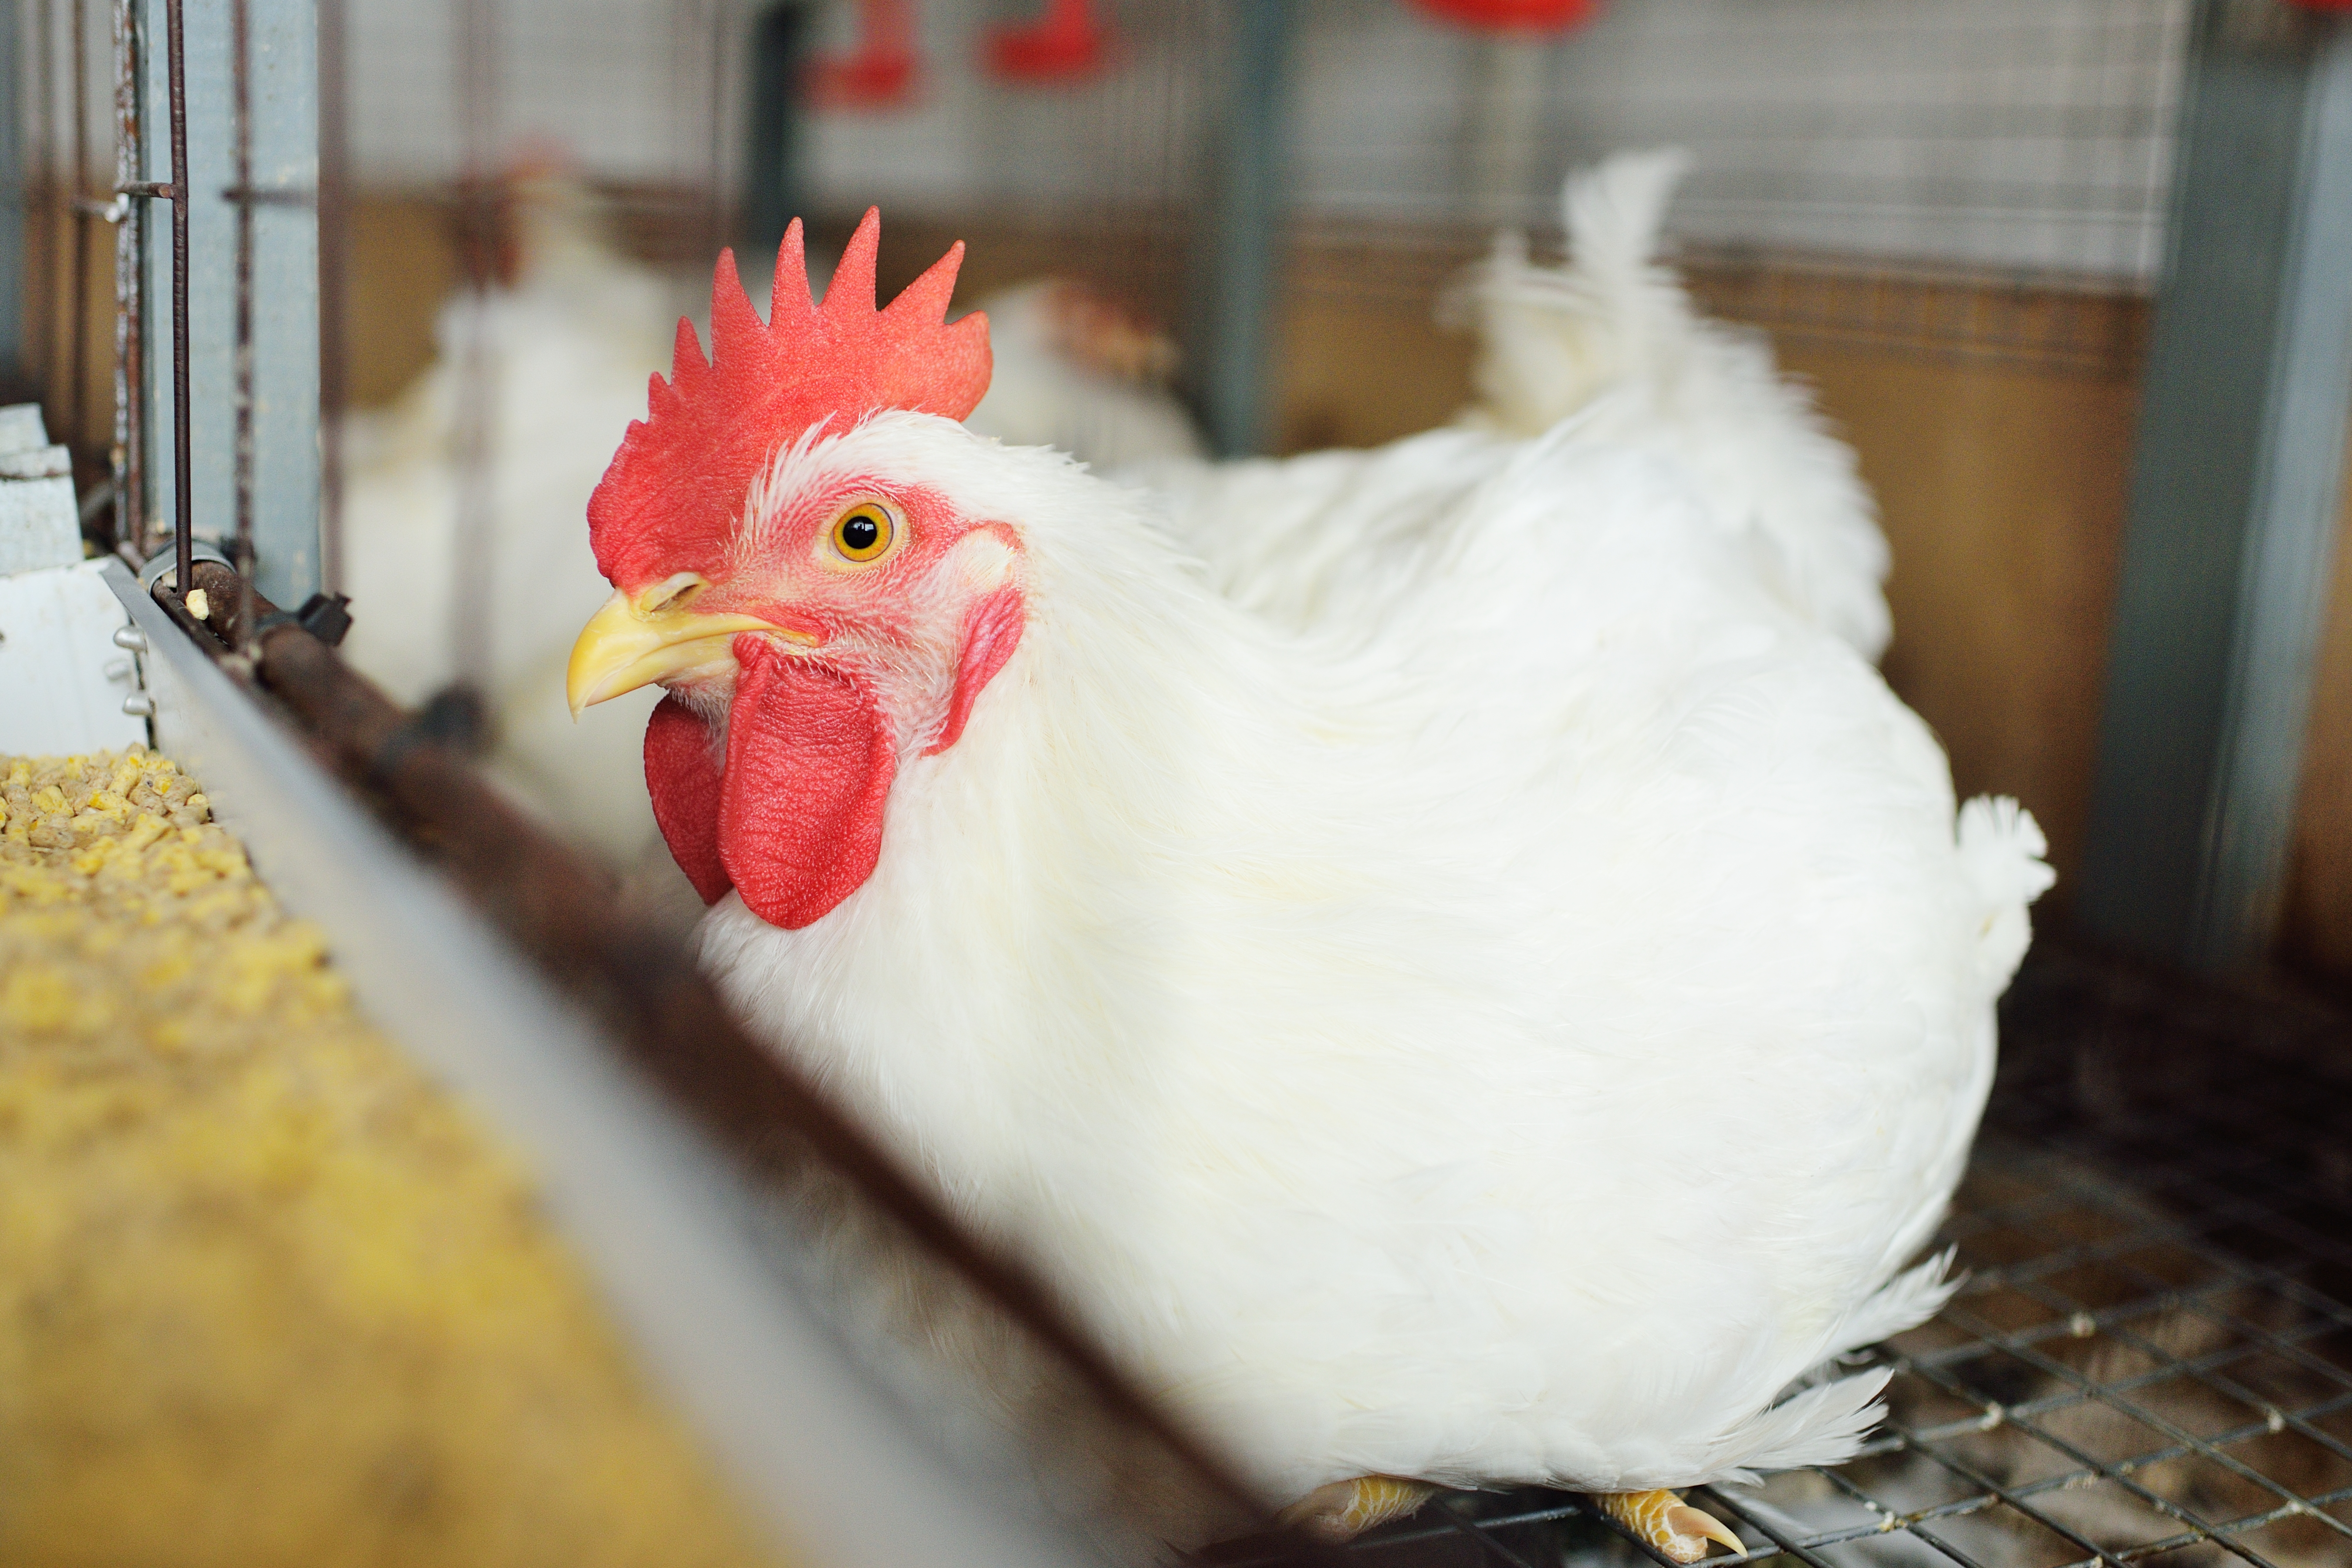 Bird flu risks: What to know as the ‘versatile’ virus continues to spread